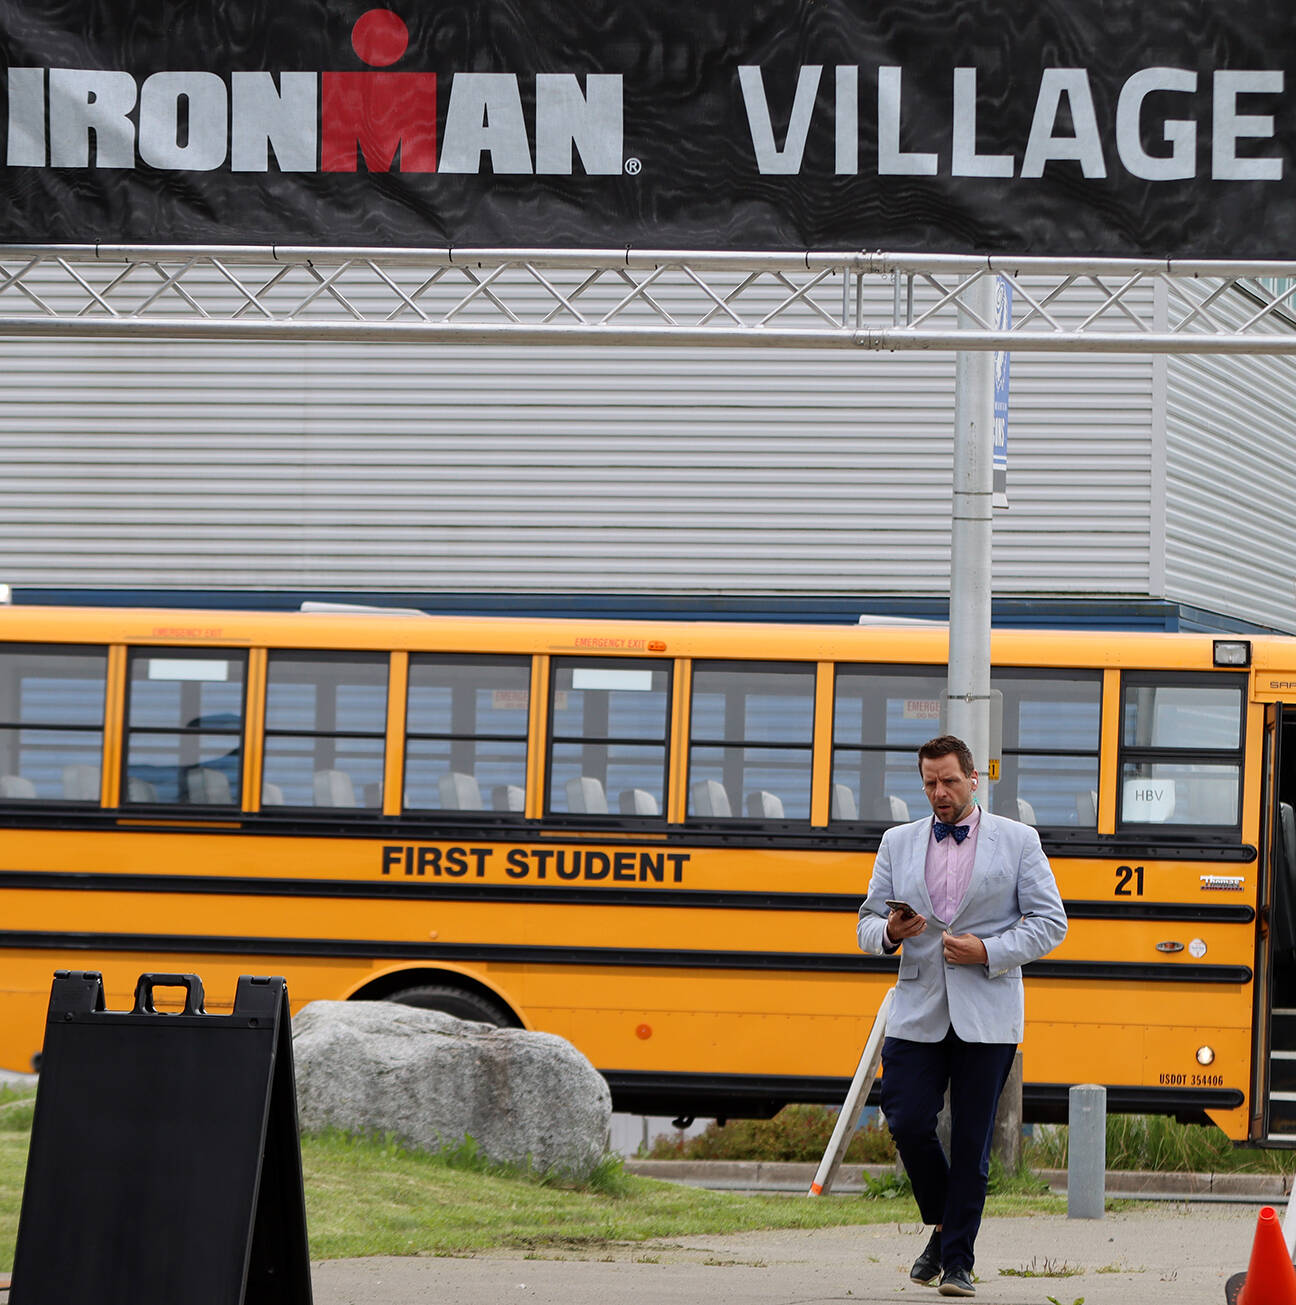 Jeff Rogers, the City and Borough of Juneau’s financial director, heads to the Ironman Village at Thunder Mountain High School on Thursday afternoon to attend the athlete briefing event. (Ben Hohenstatt / Juneau Empire)